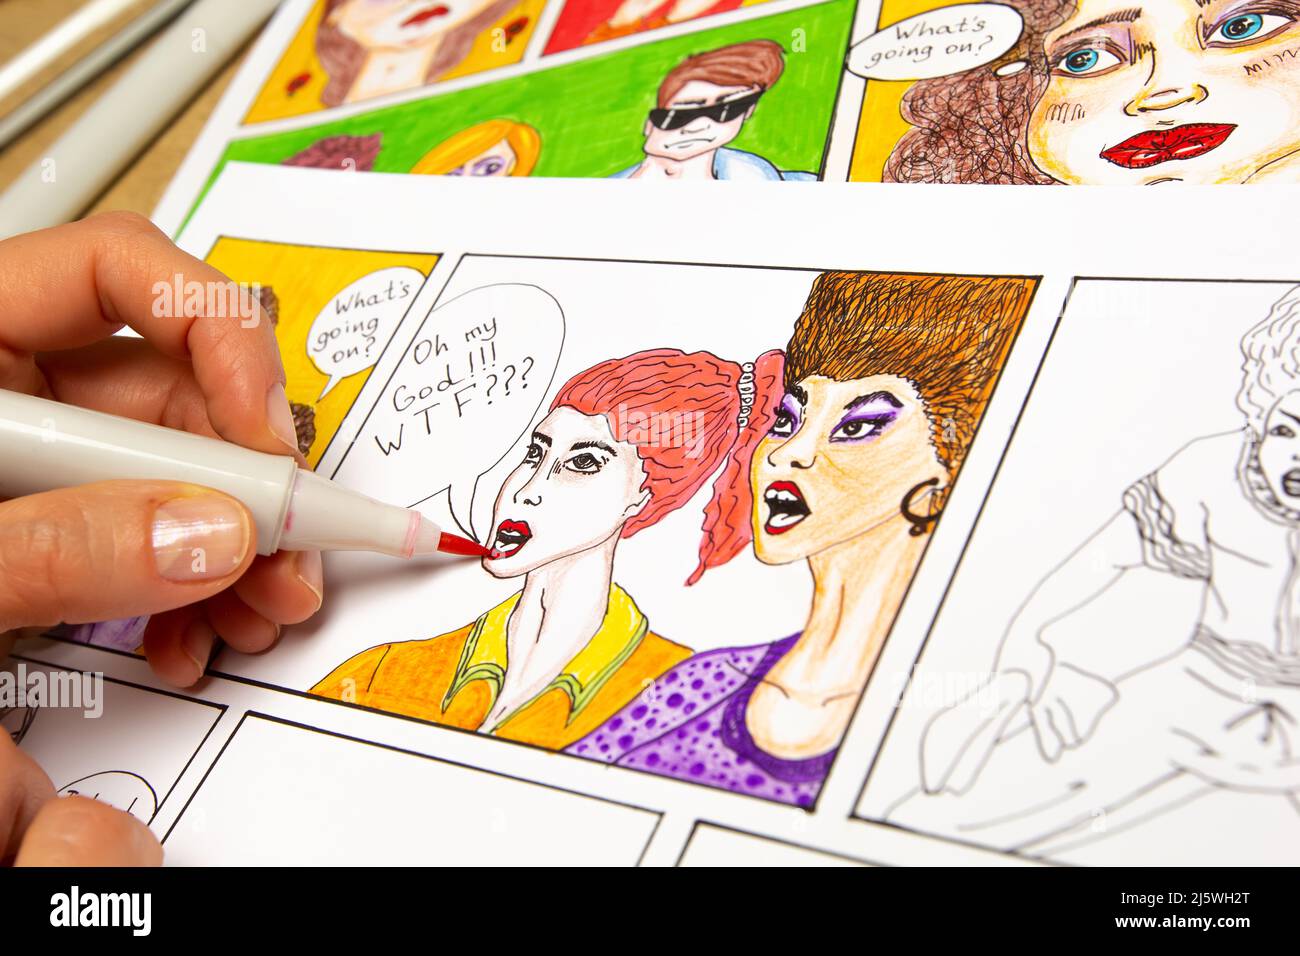 The artist designer draws sketches of comic book characters on paper. The animator creates a storyboard on paper. Stock Photo